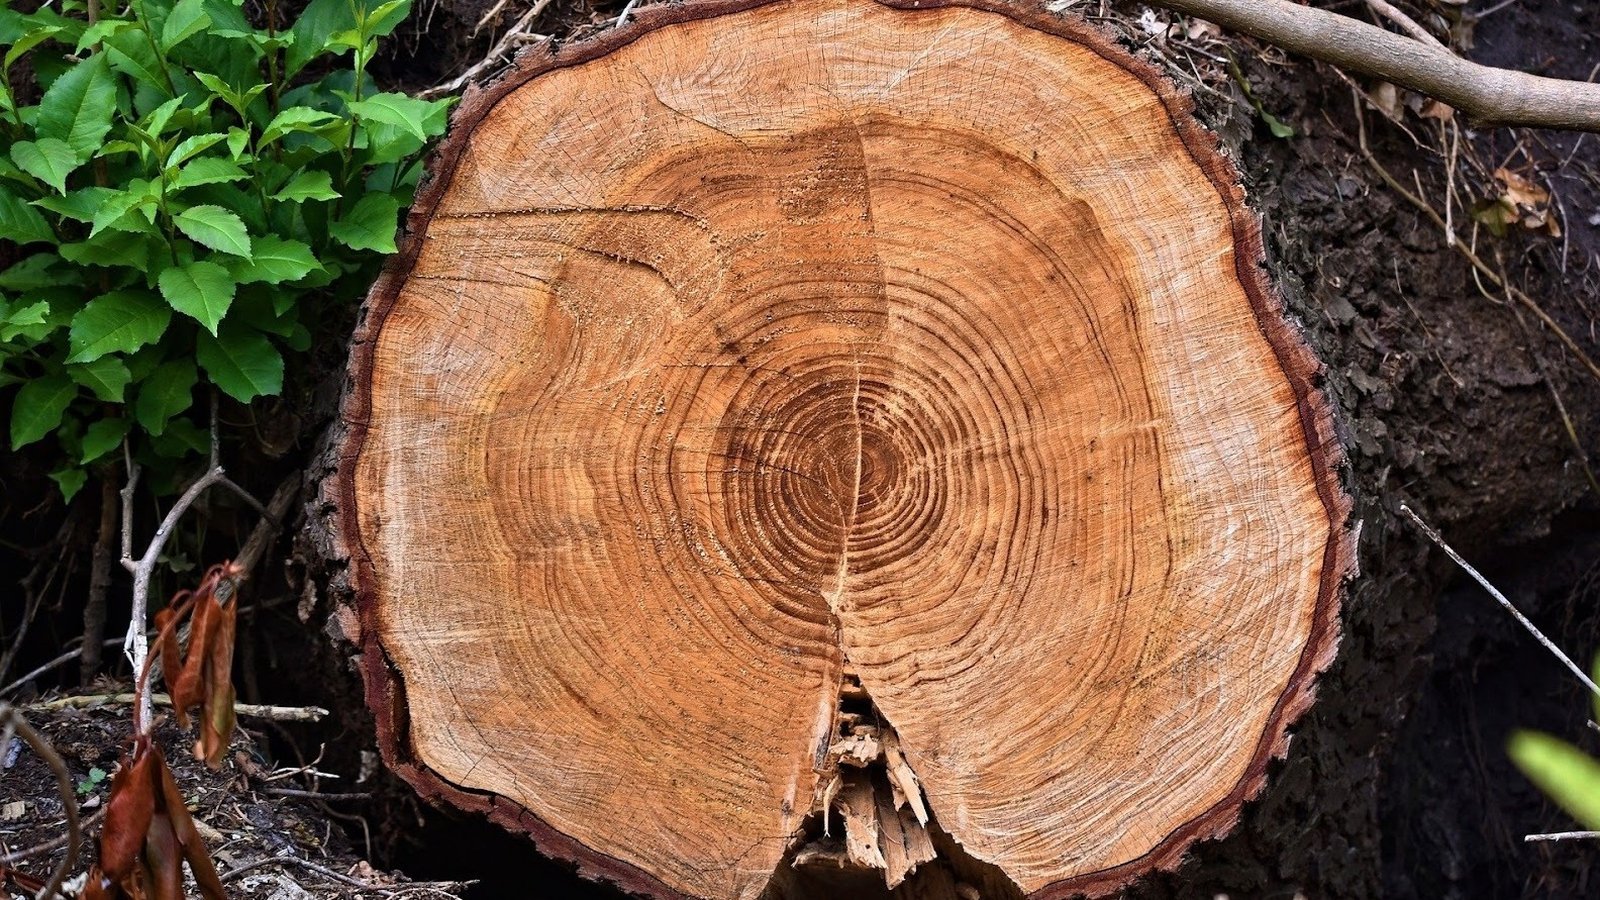 How Growth Rings Affect the Strength of Timber